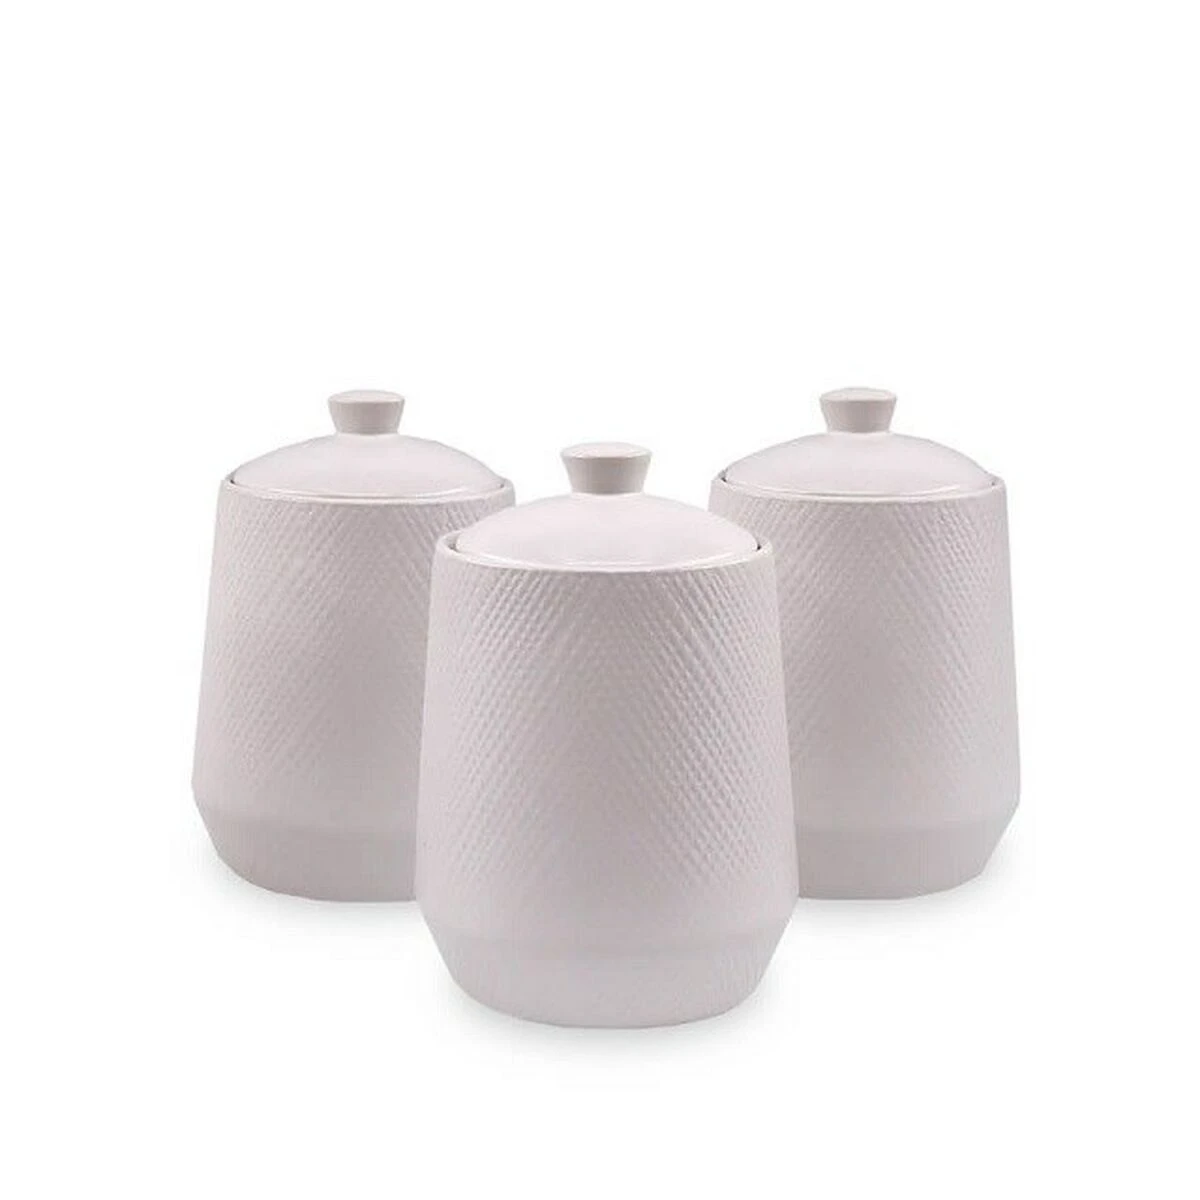 3 textured white jars with lids on plain background.